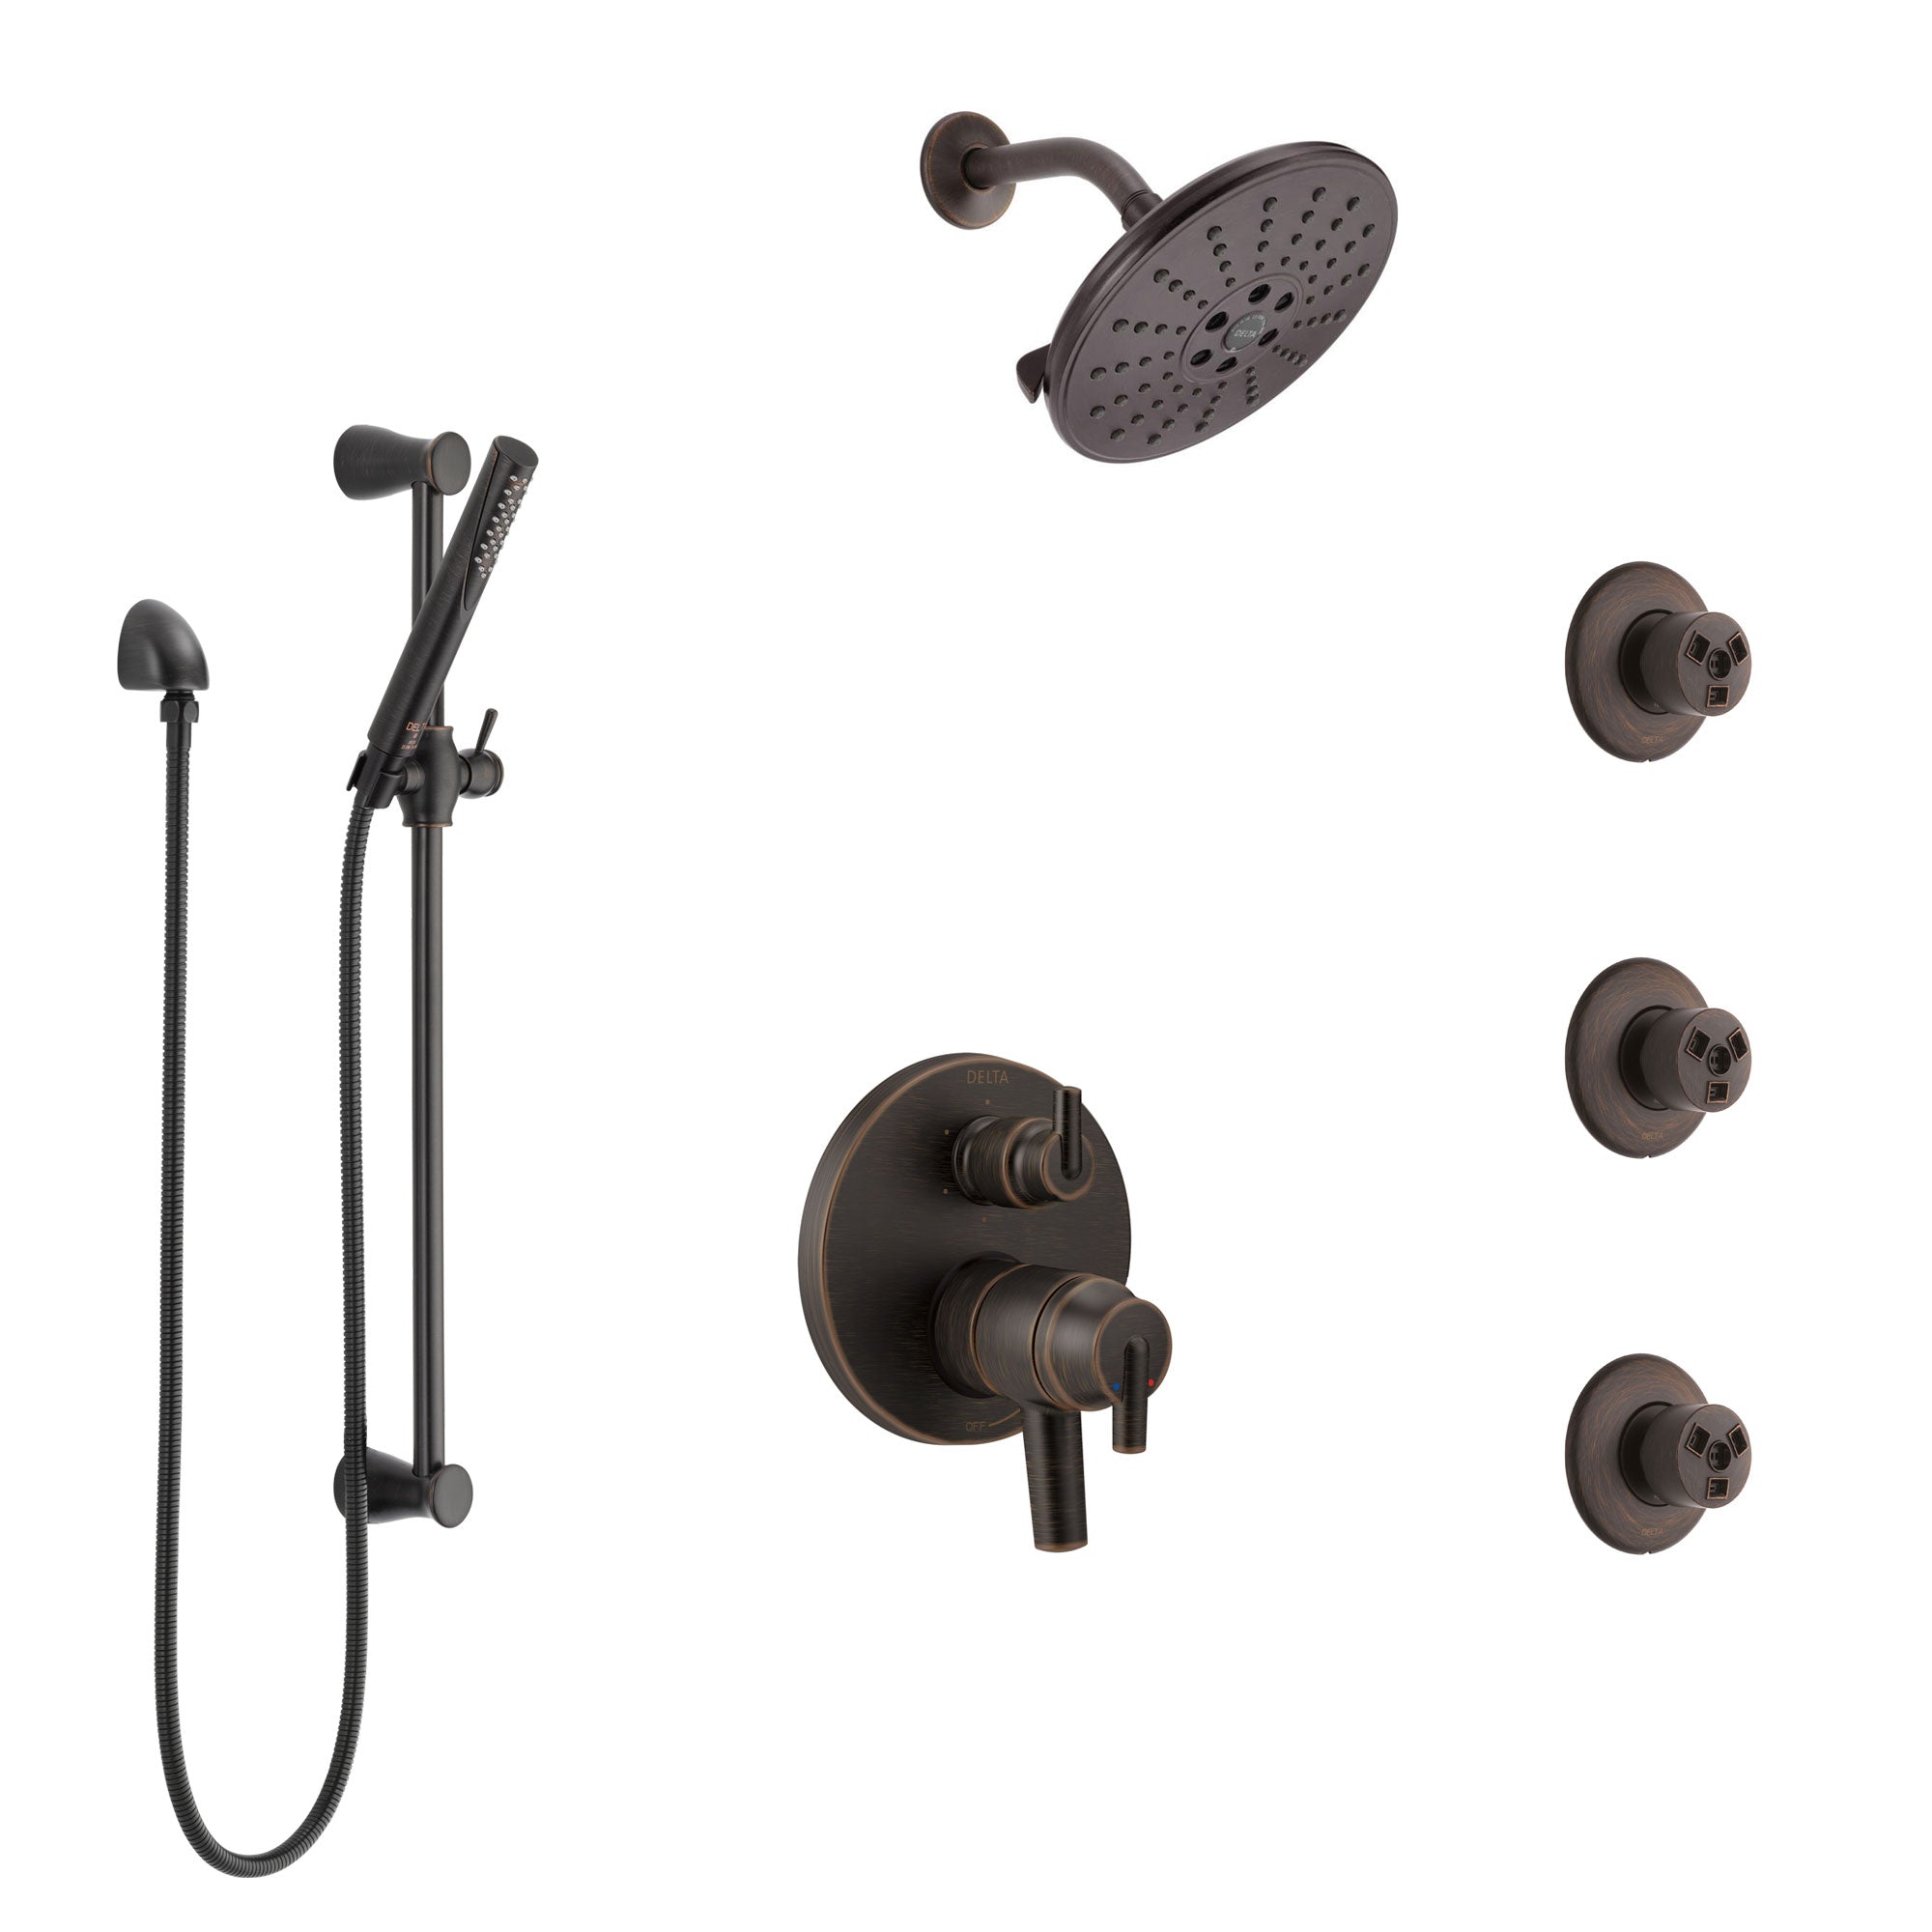 Delta Trinsic Venetian Bronze Shower System with Dual Control Handle, Integrated Diverter, Showerhead, 3 Body Sprays, and Hand Shower SS27959RB1